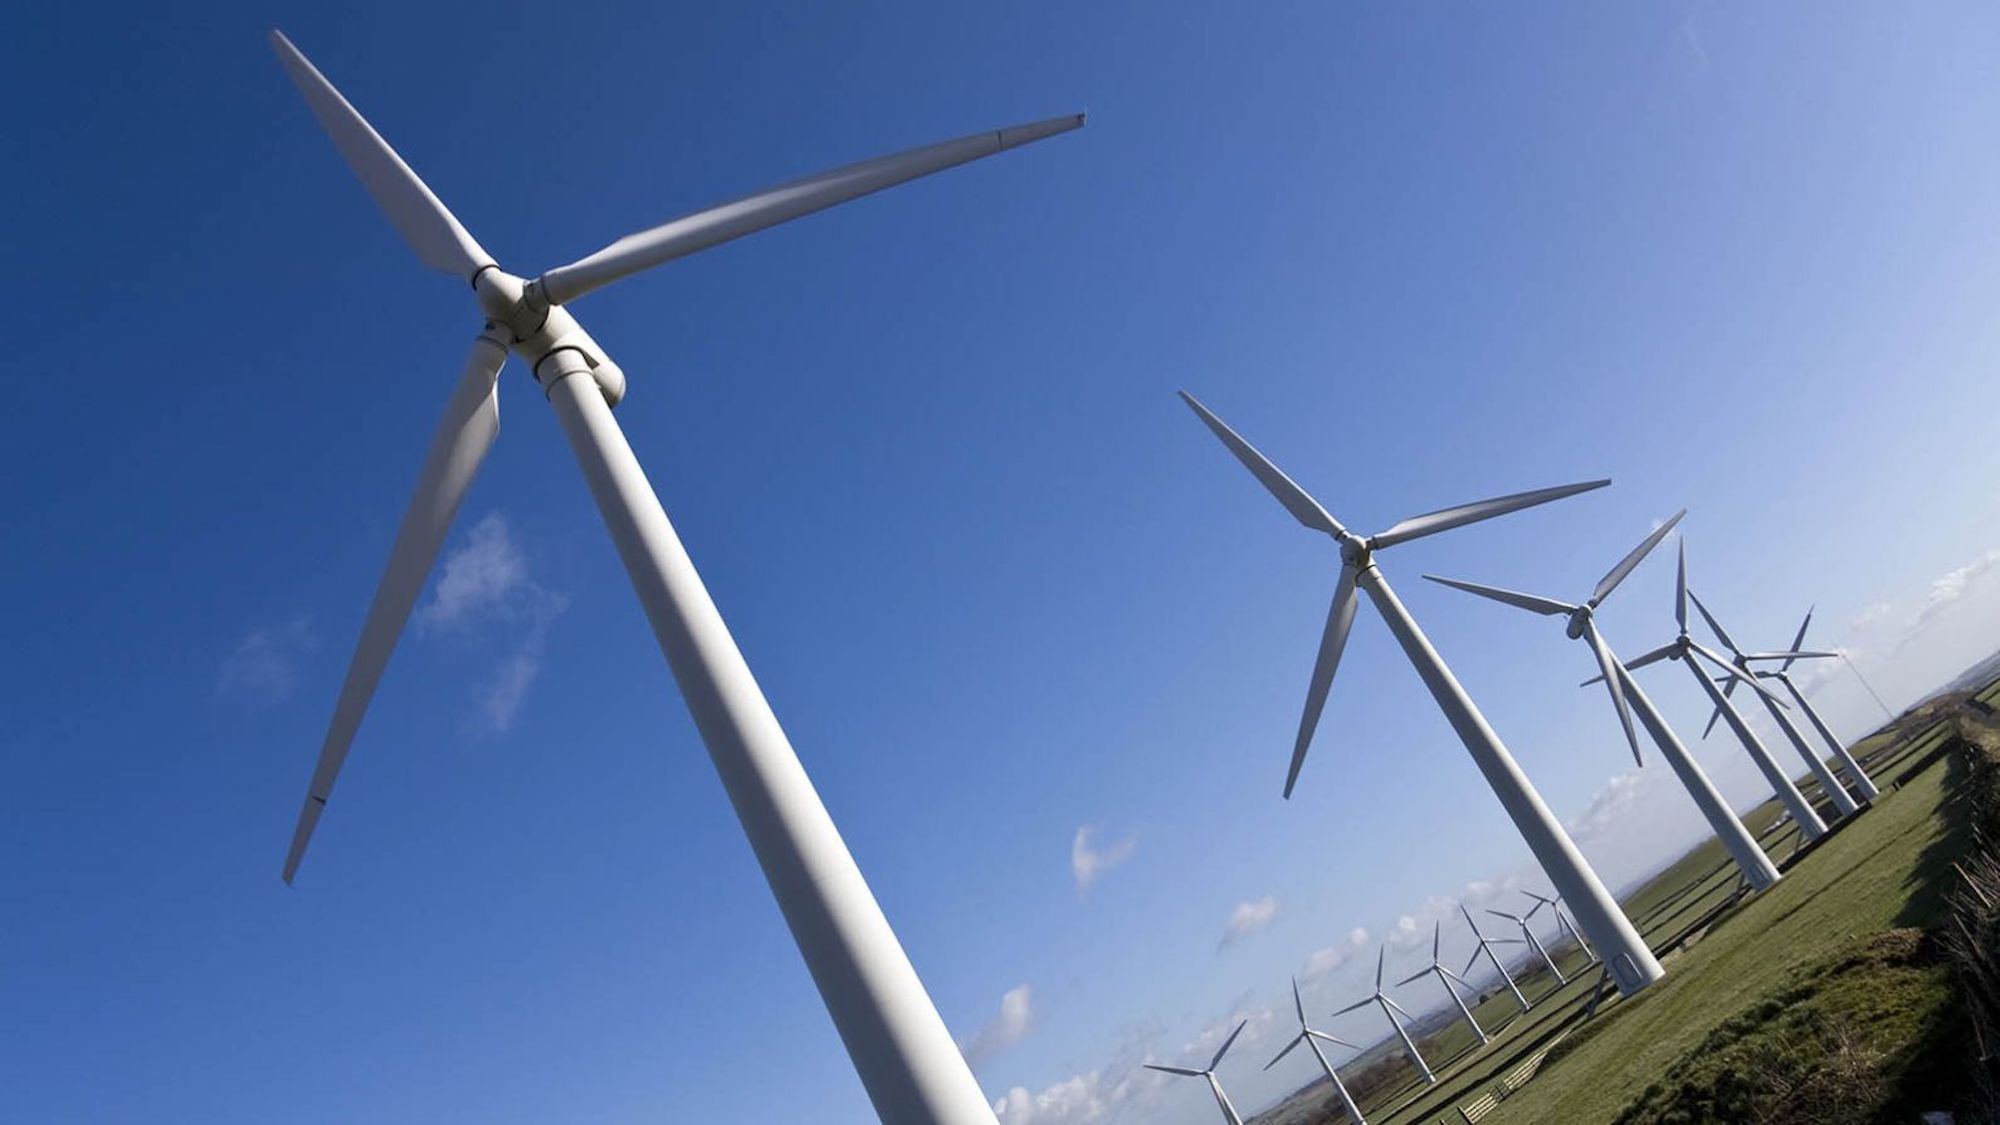 Chinese heavy equipment manufacturer Sany to explore wind power industry in Brazil